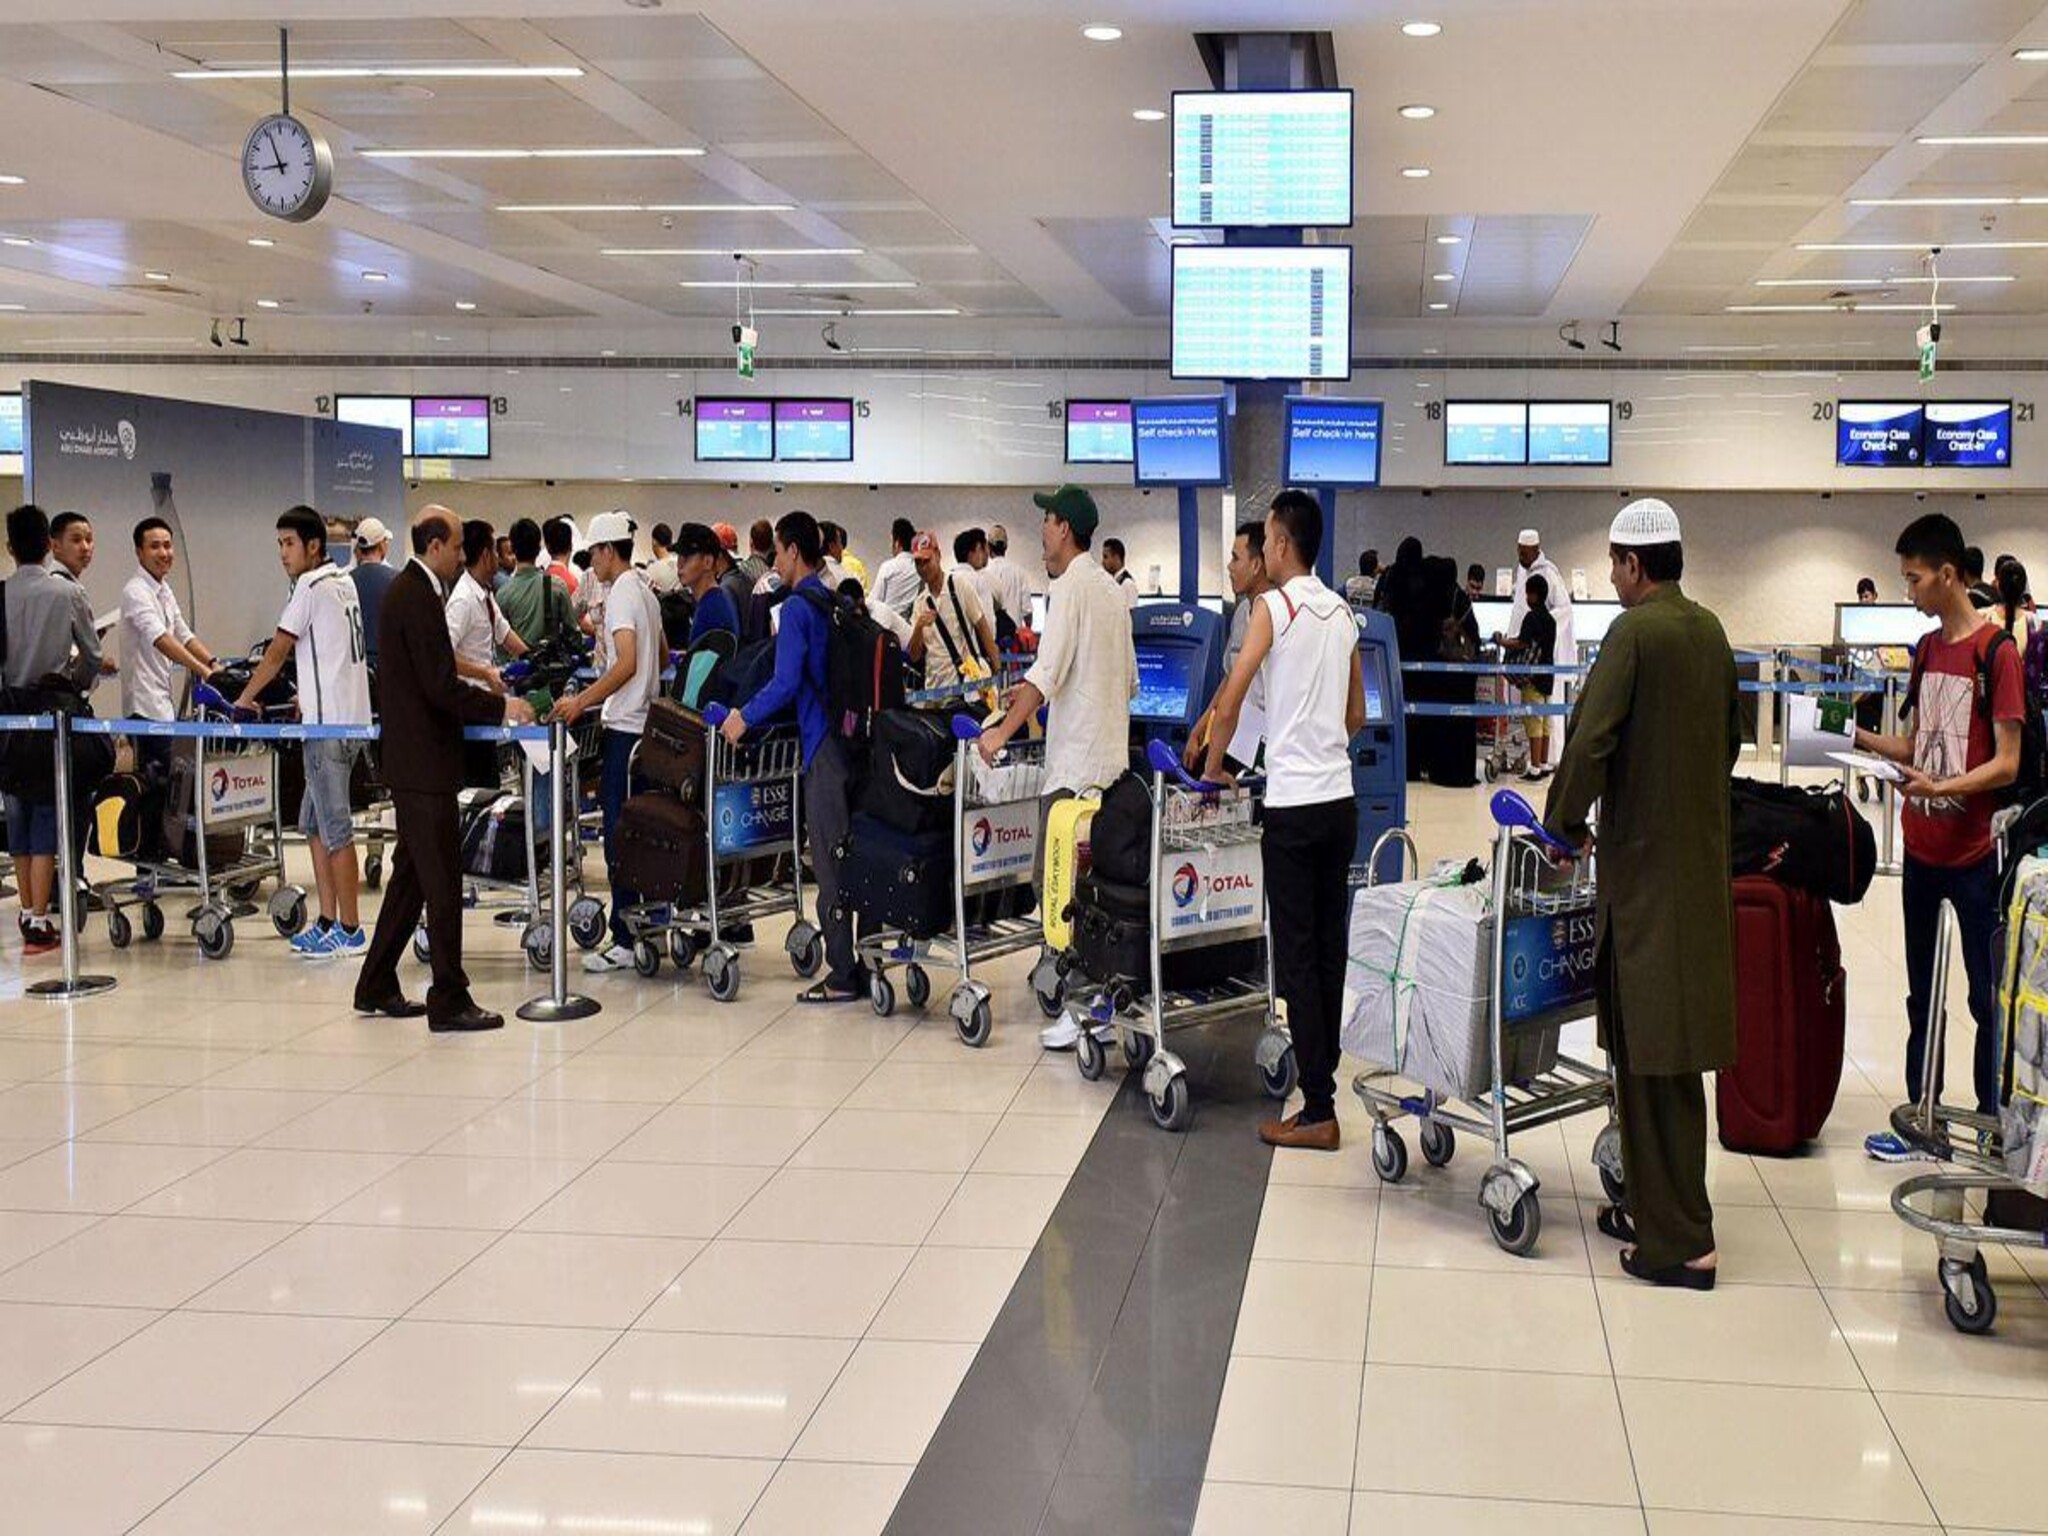 UAE: A new service for Abu Dhabi Airport passengers